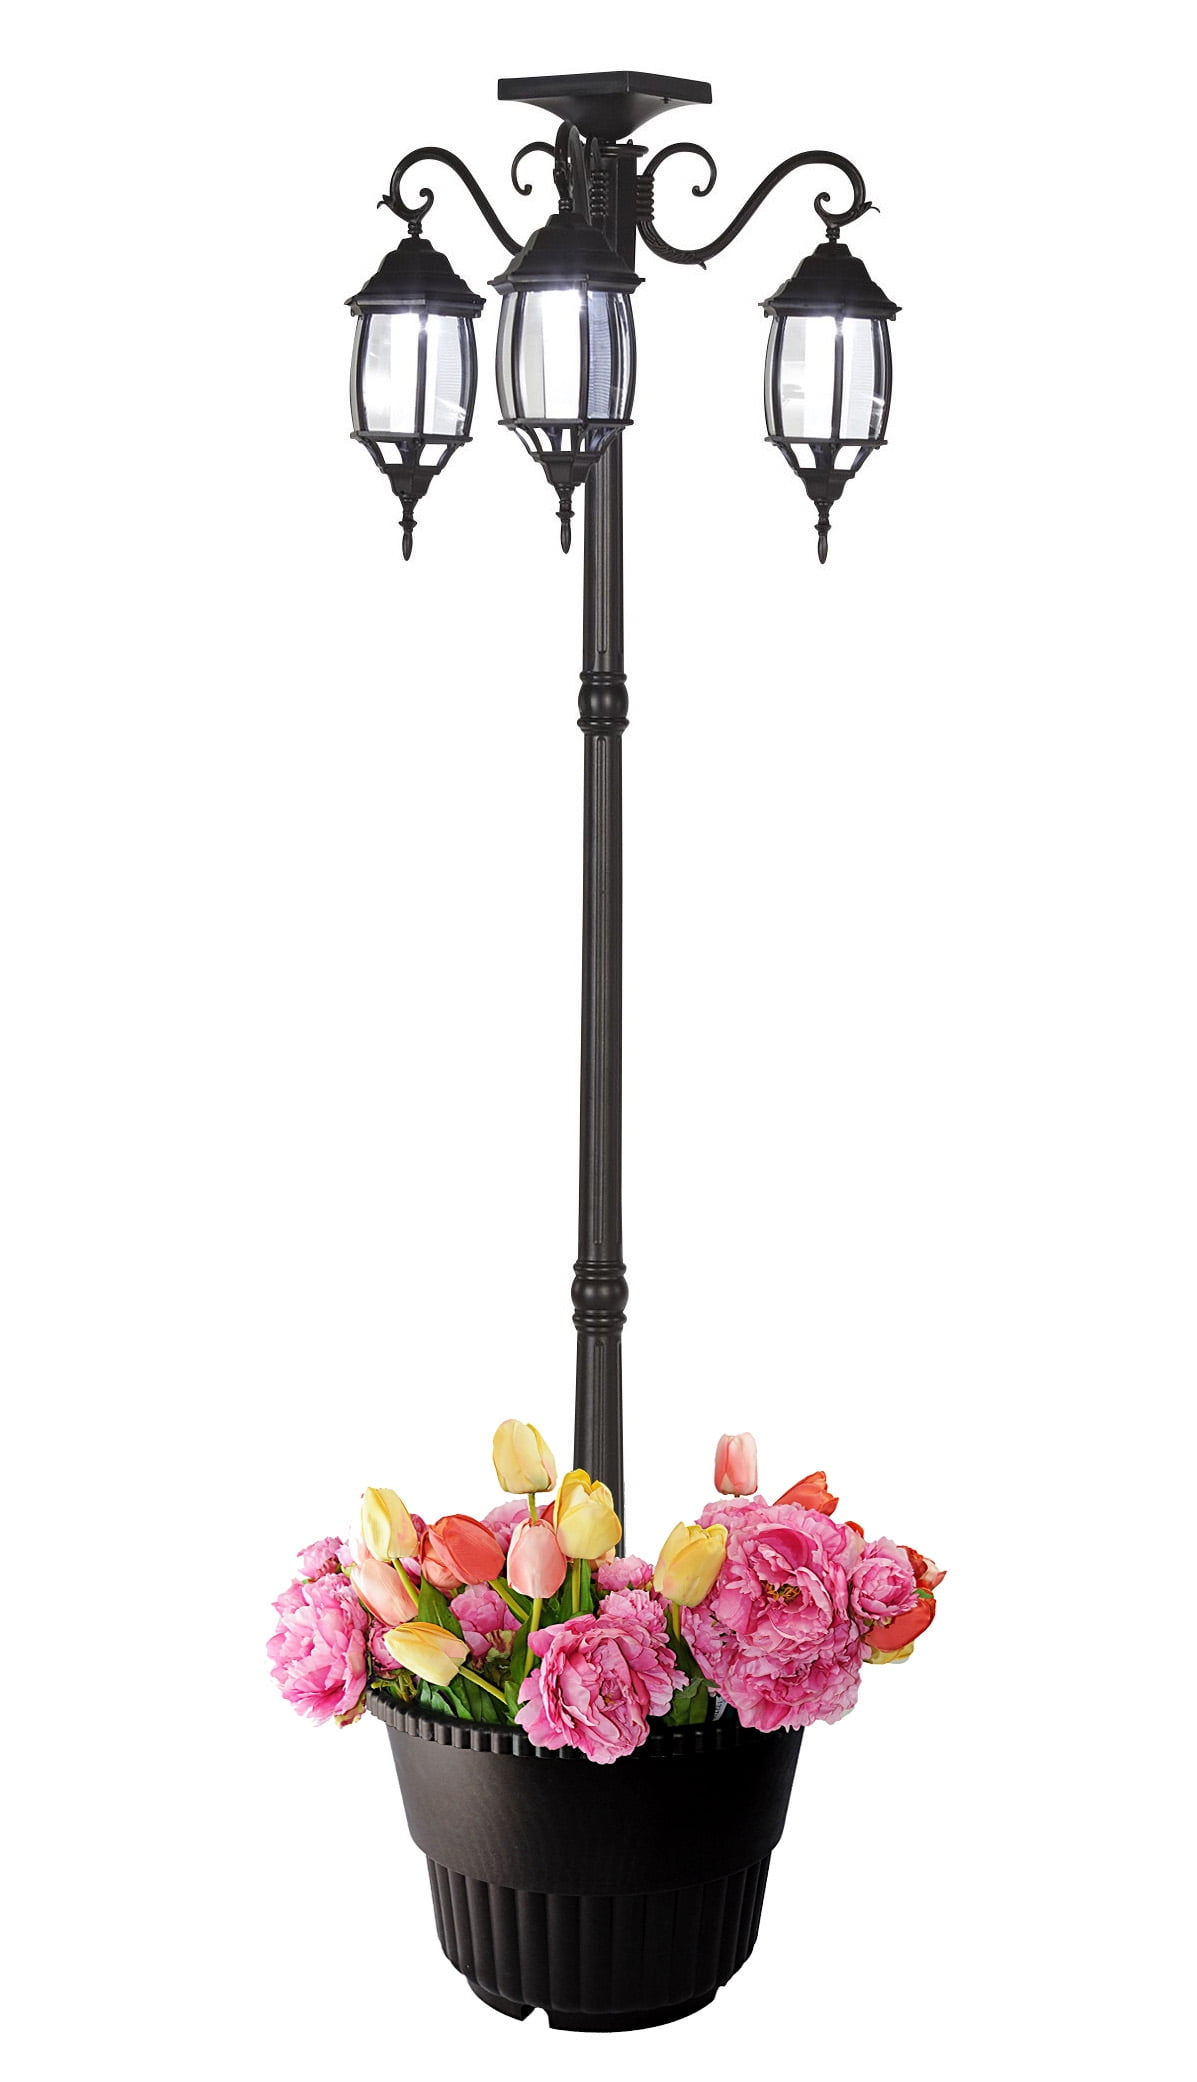 Tall Solar Lamp Post And Planter, Outdoor Solar Lamp Post Light With Planter